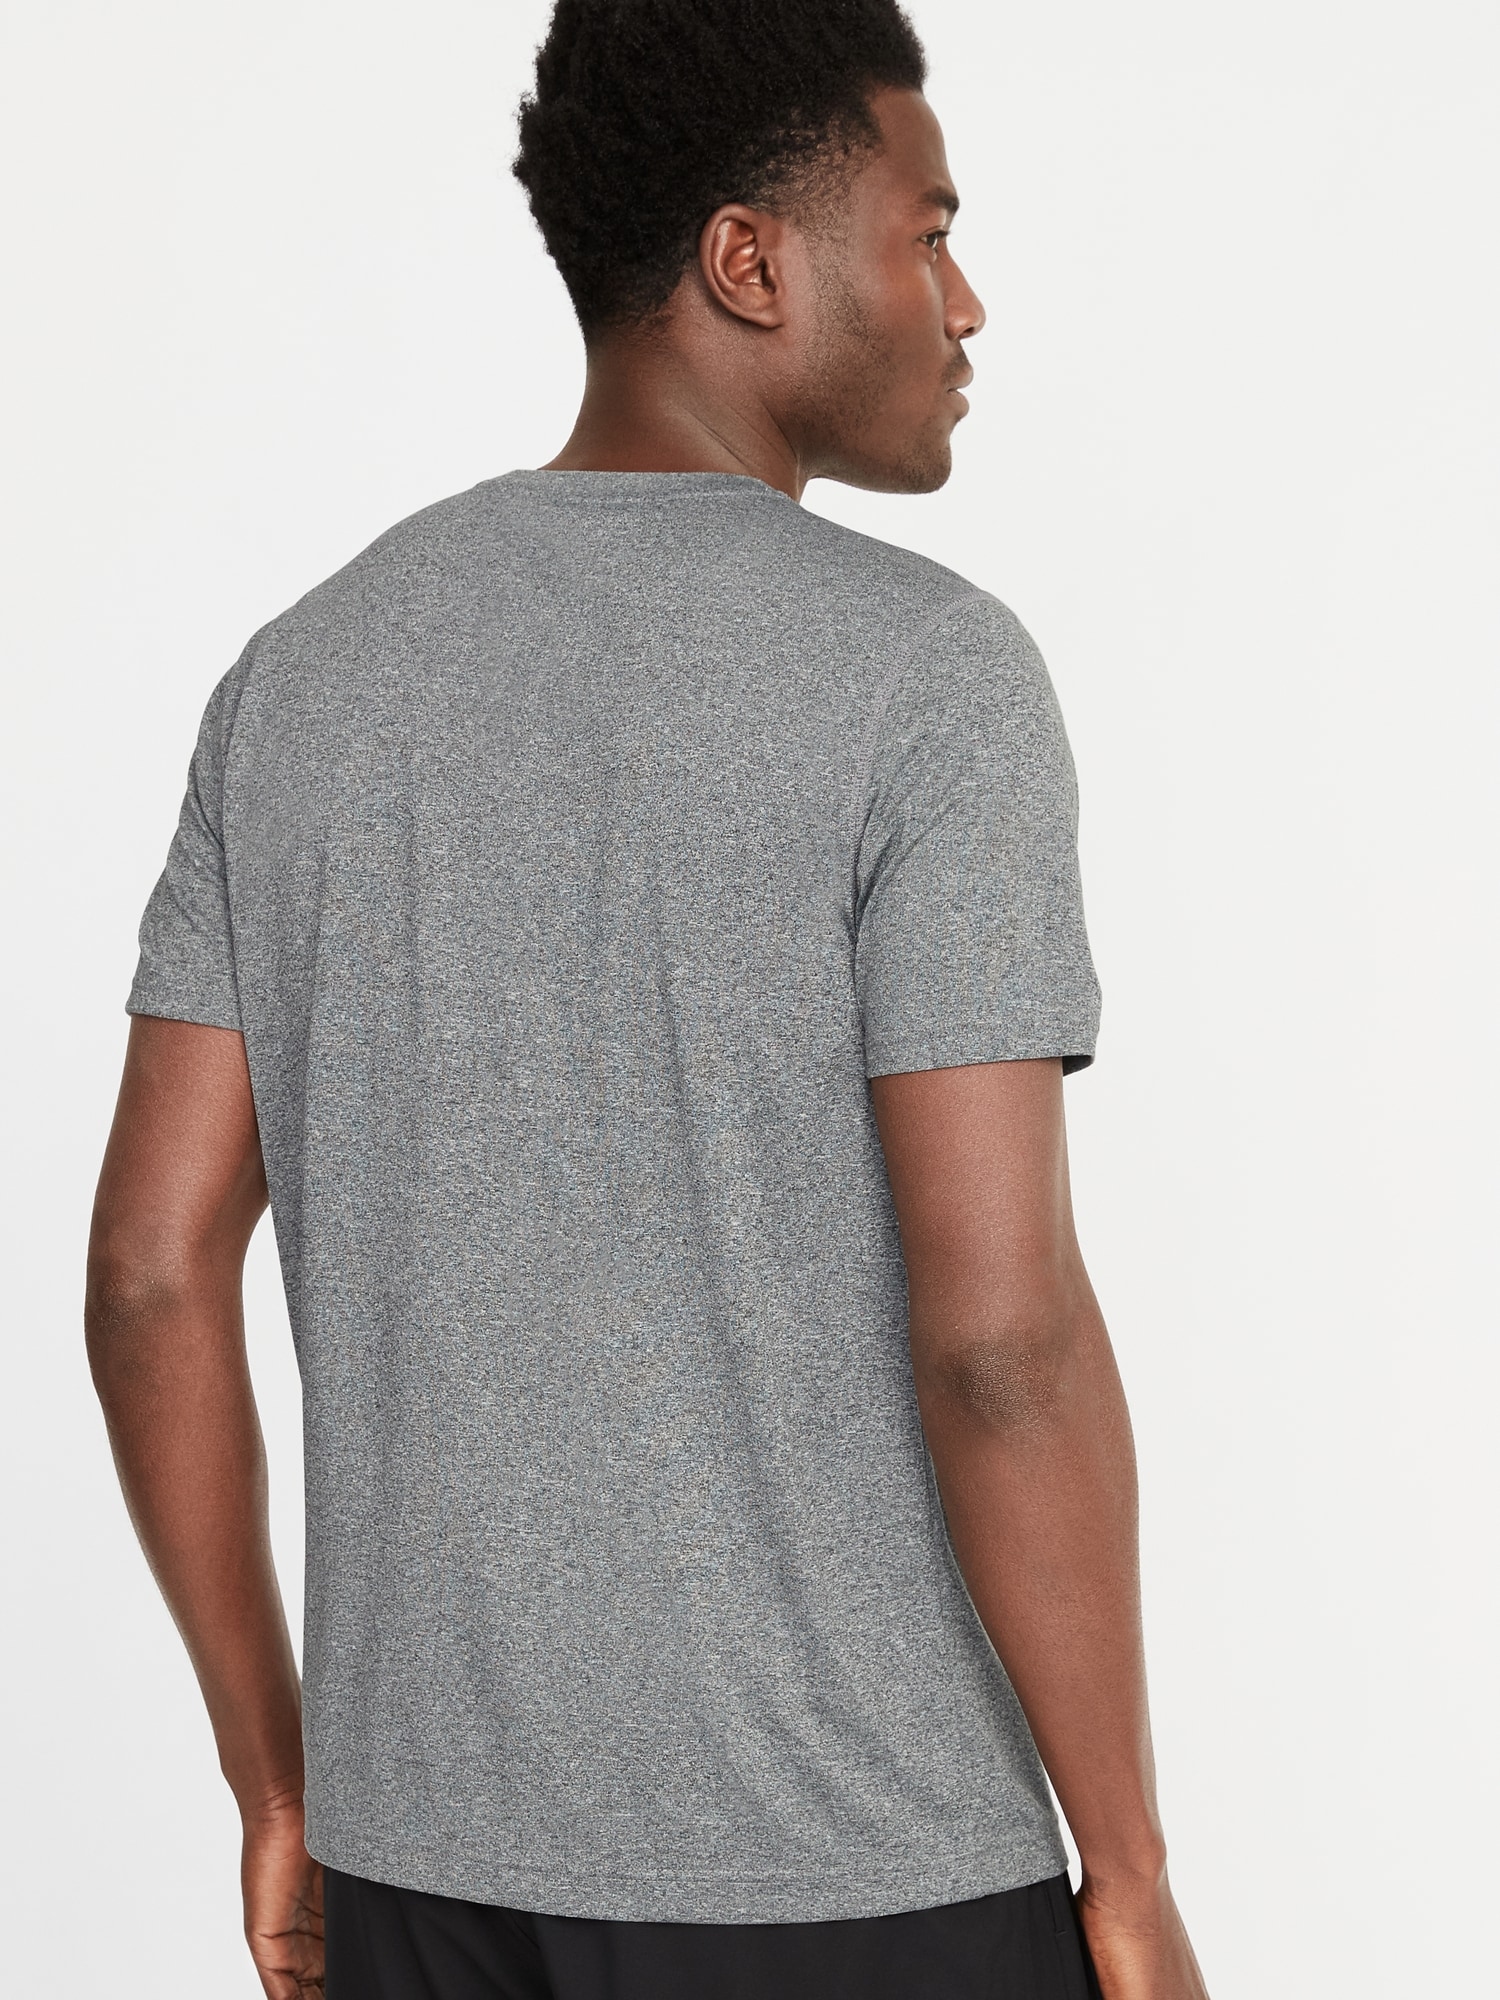 Graphic Go-Dry Performance Tee for Men | Old Navy